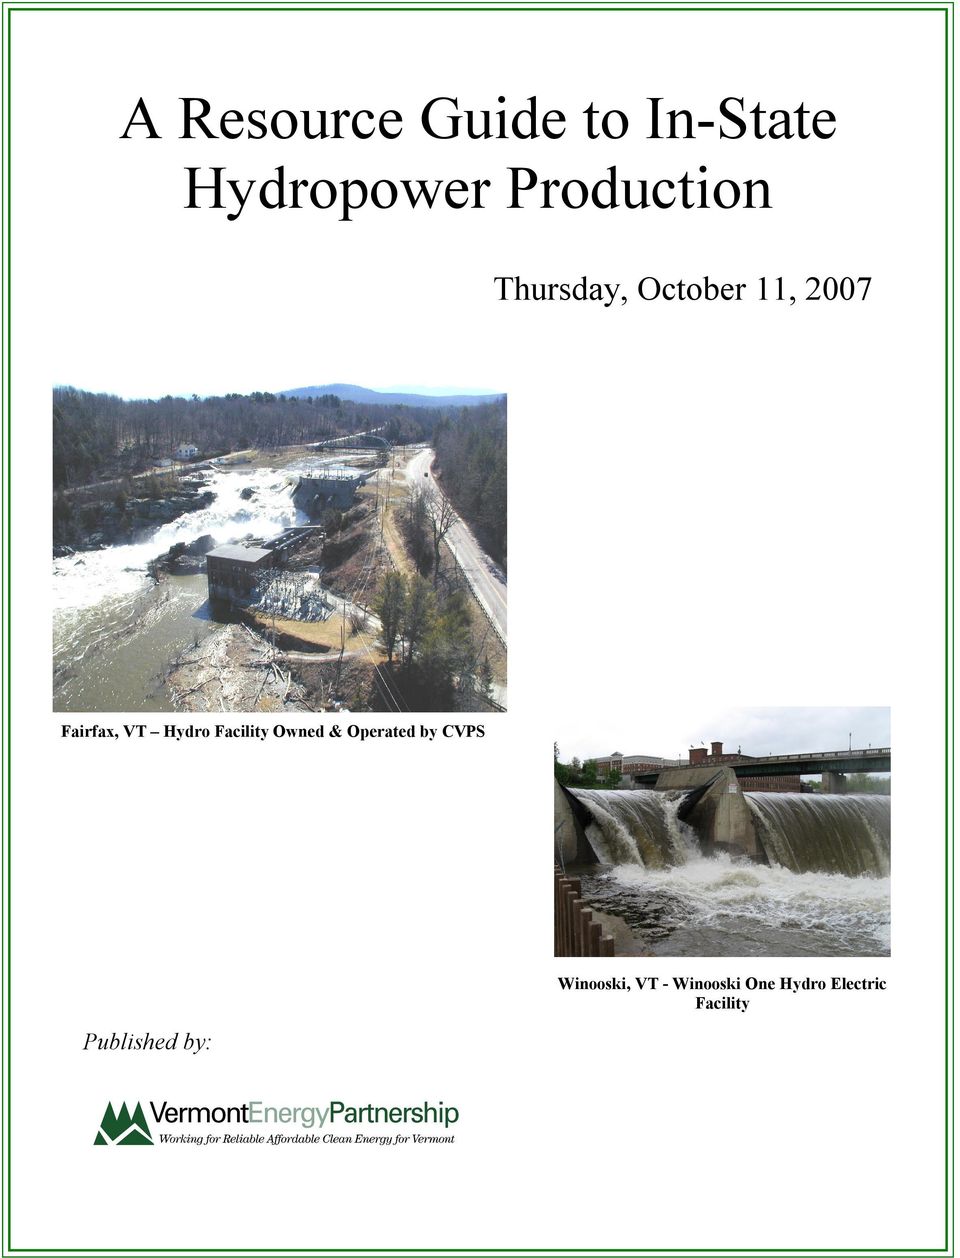 VT Hydro Facility Owned & Operated by CVPS